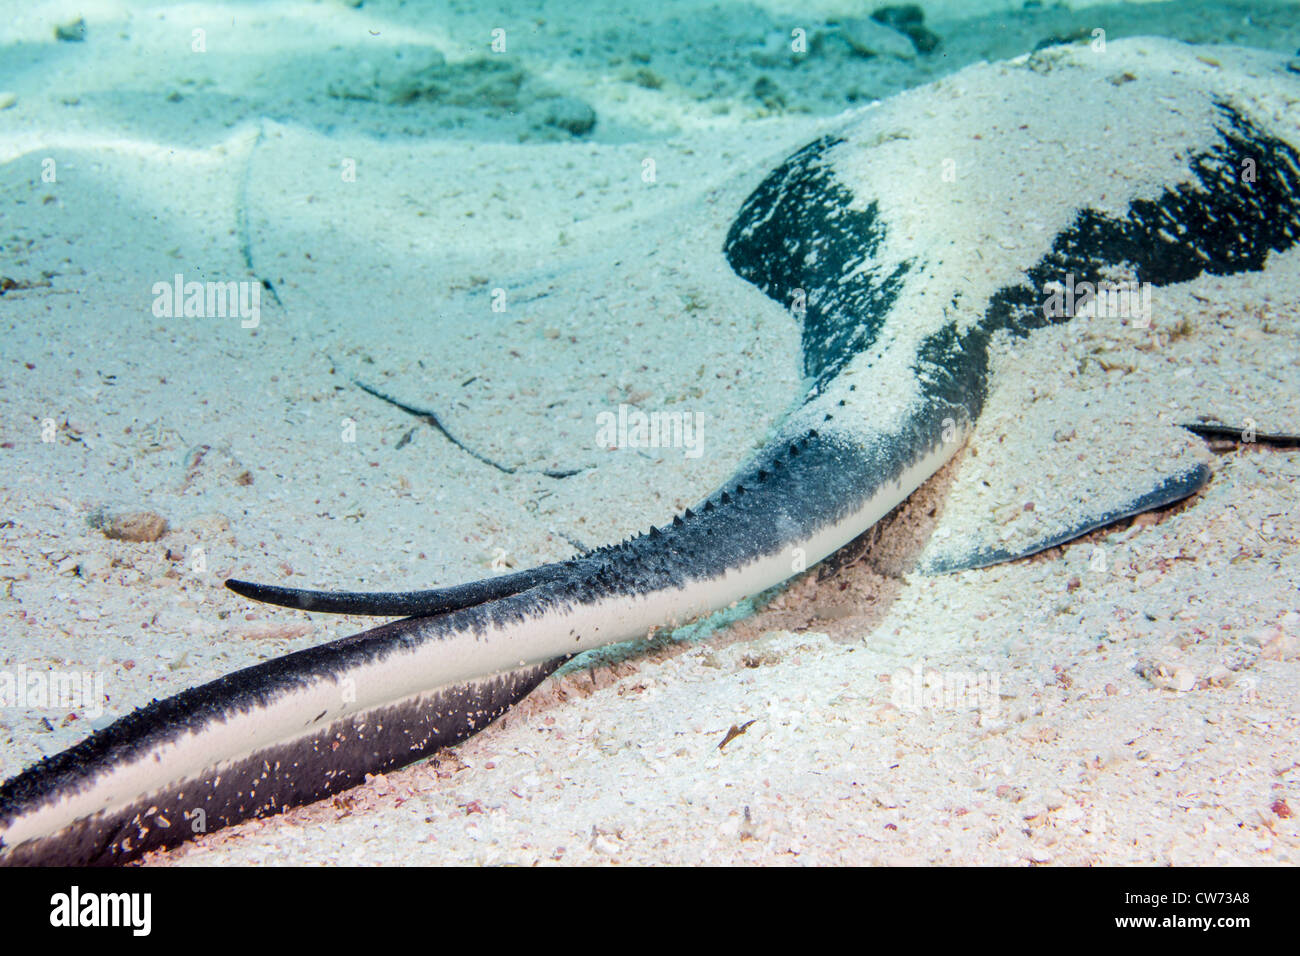 Barbed tail of a Southern stingray protrudes from the sand Stock Photo